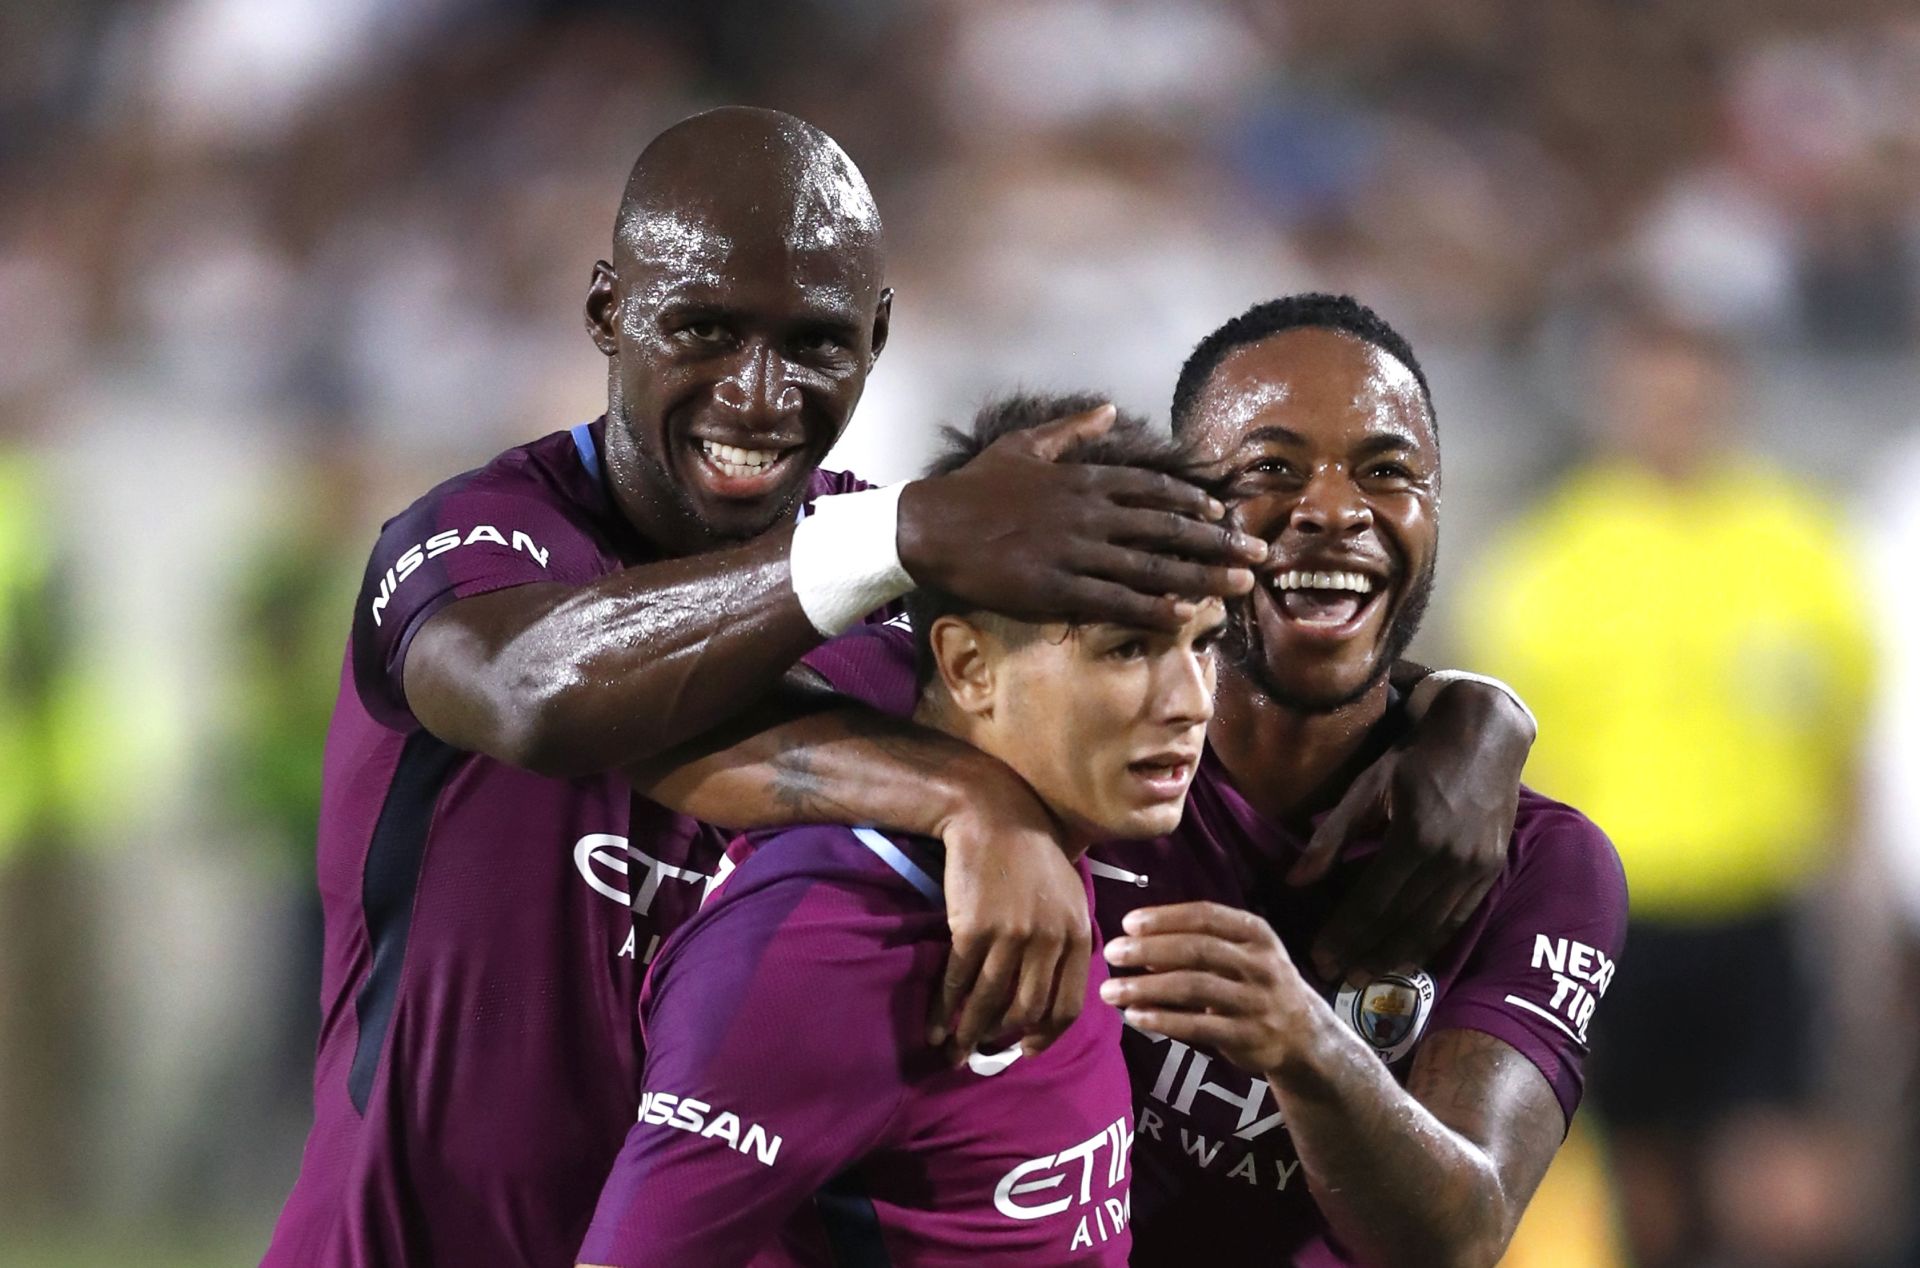 epa06111924 Manchester City's Brahim Diaz (C) is embraced by teammates Eliaquim Mangala (L) and Raheem Sterling (R) after Diaz scored a goal against the Real Madrid CF in second half action of their International Champions Cup soccer match at the Los Angeles Memorial Coliseum in Los Angeles, California, USA, 26 July 2017. Manchester City won the match.  EPA/PAUL BUCK